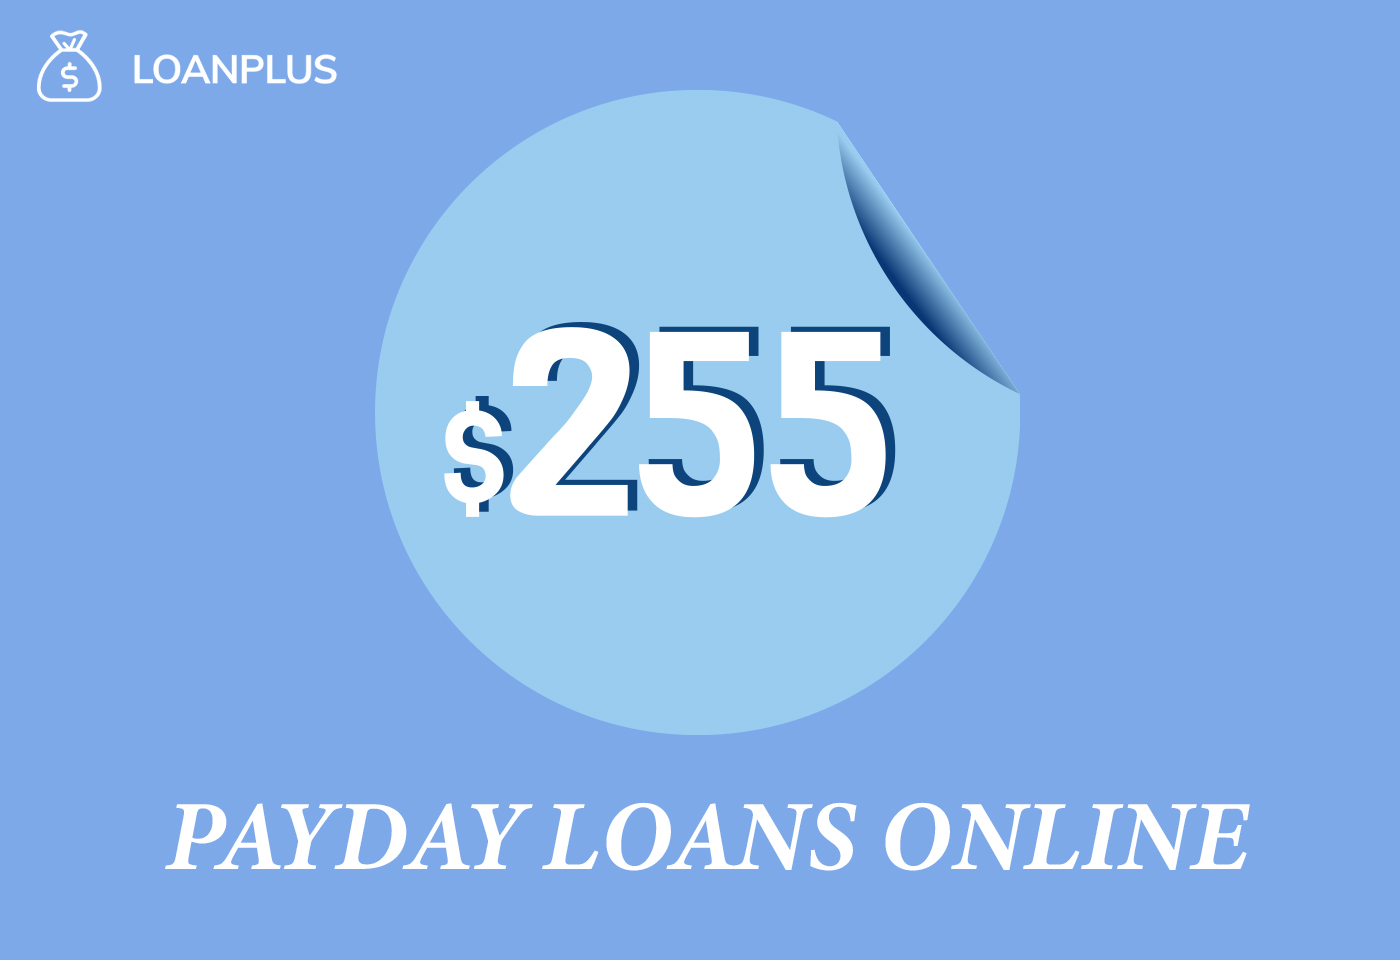 5 payday loans online: Quick Approval